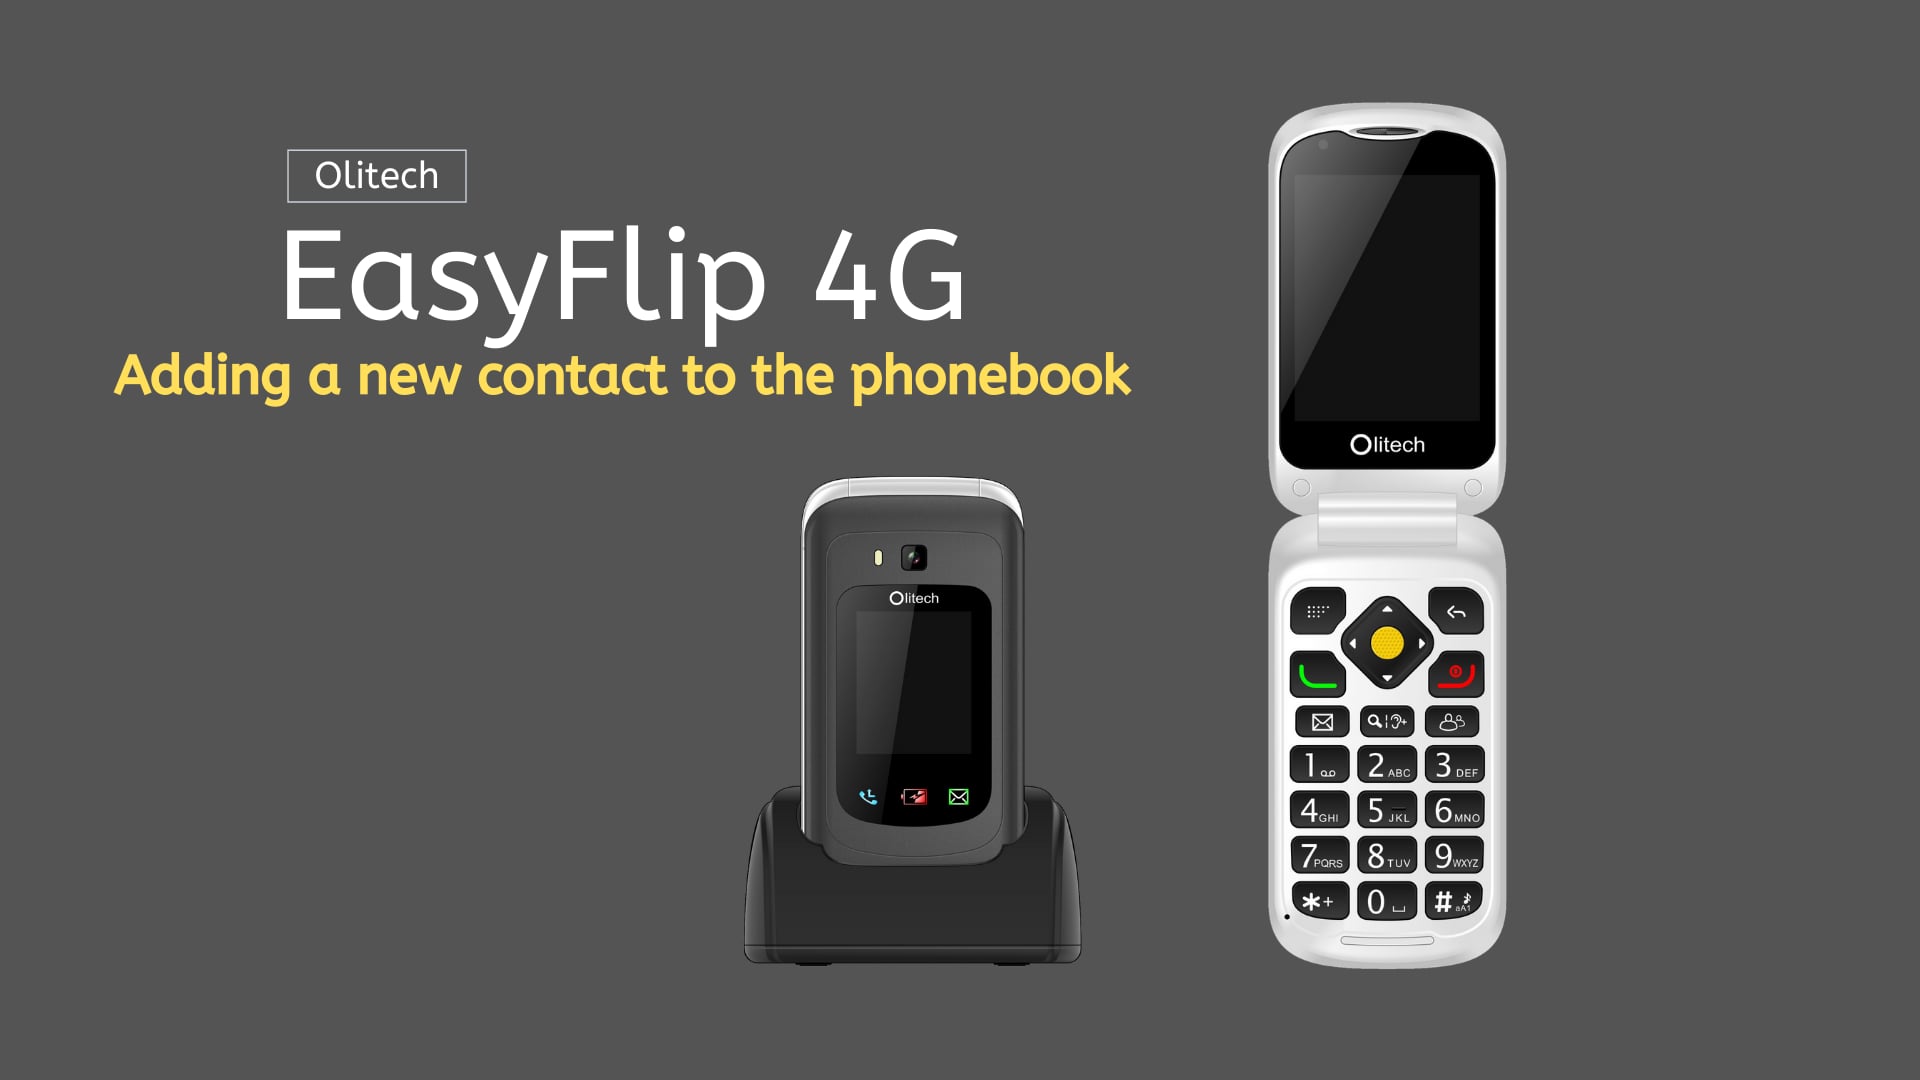 Olitech EasyFlip 4G - Adding a new contact to the phonebook